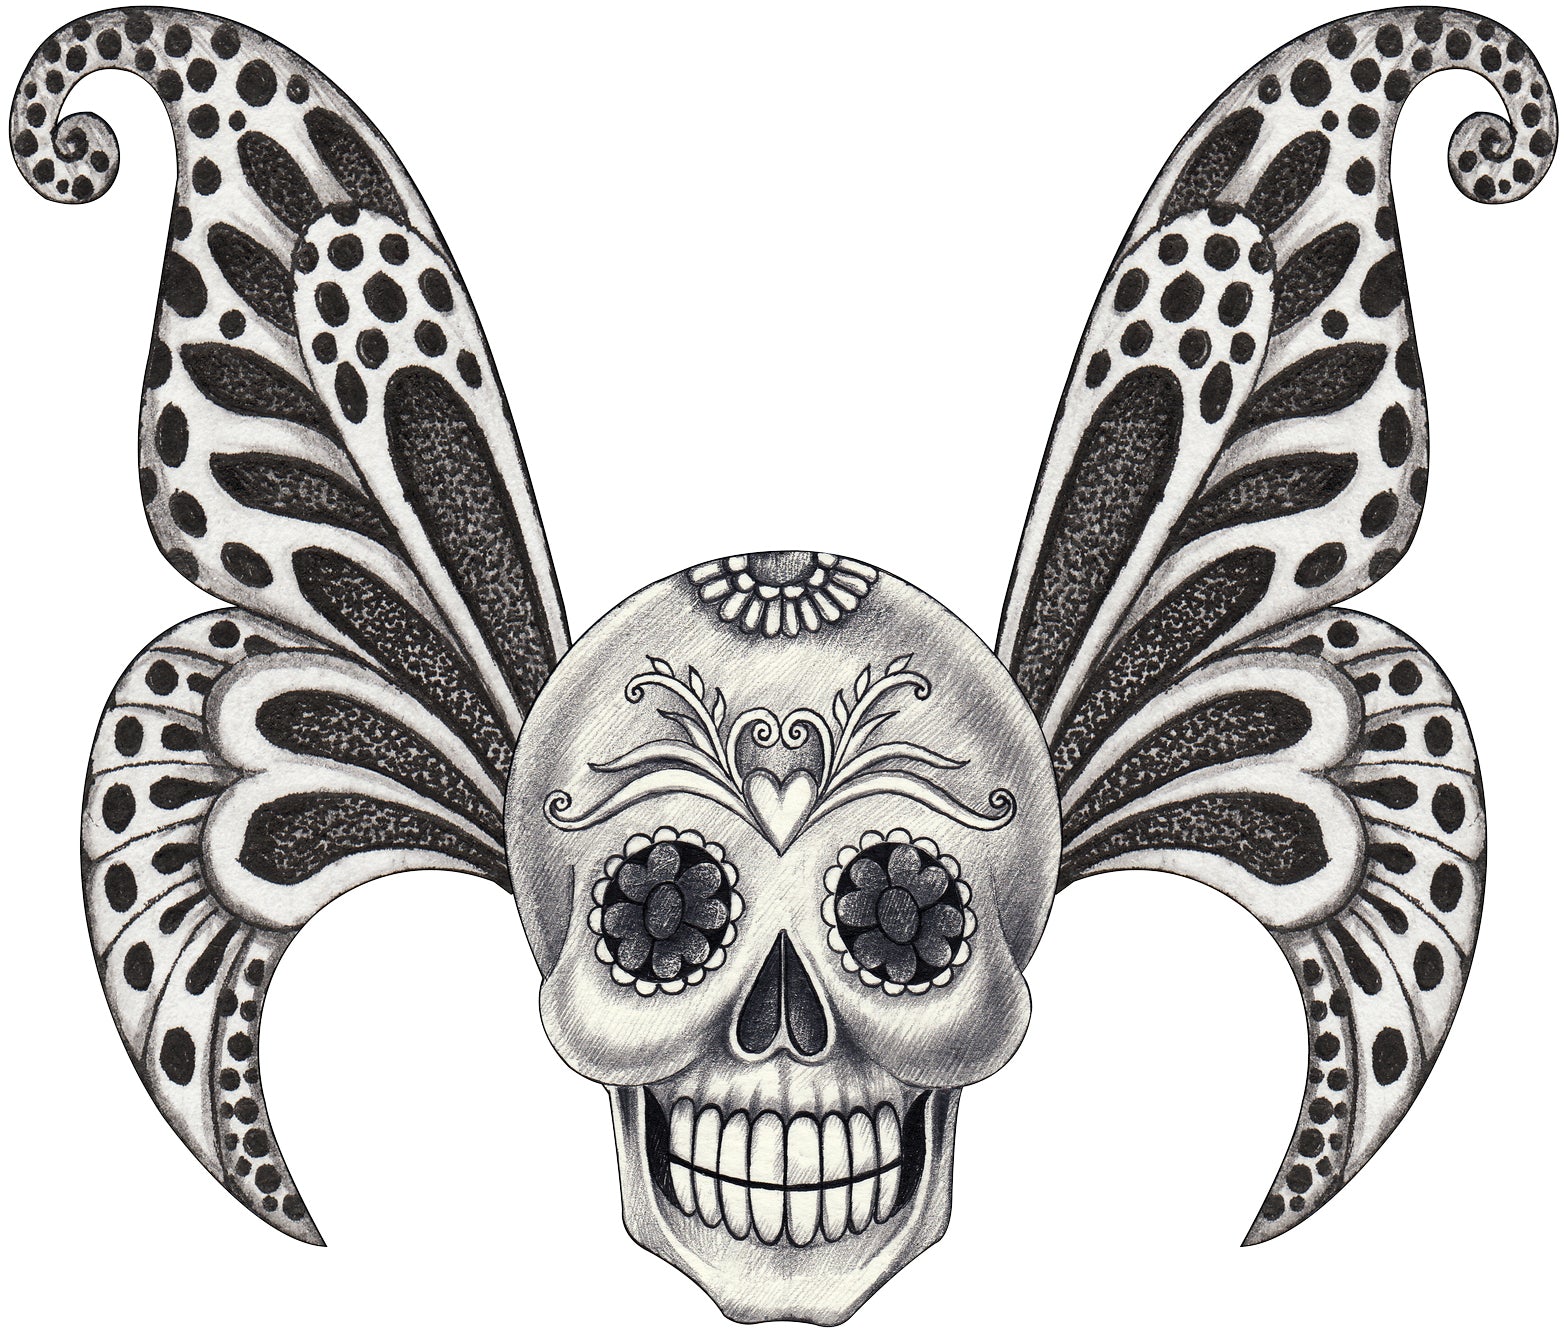 Pencil Sketch Skull with Fairy Wings Vinyl Decal Sticker